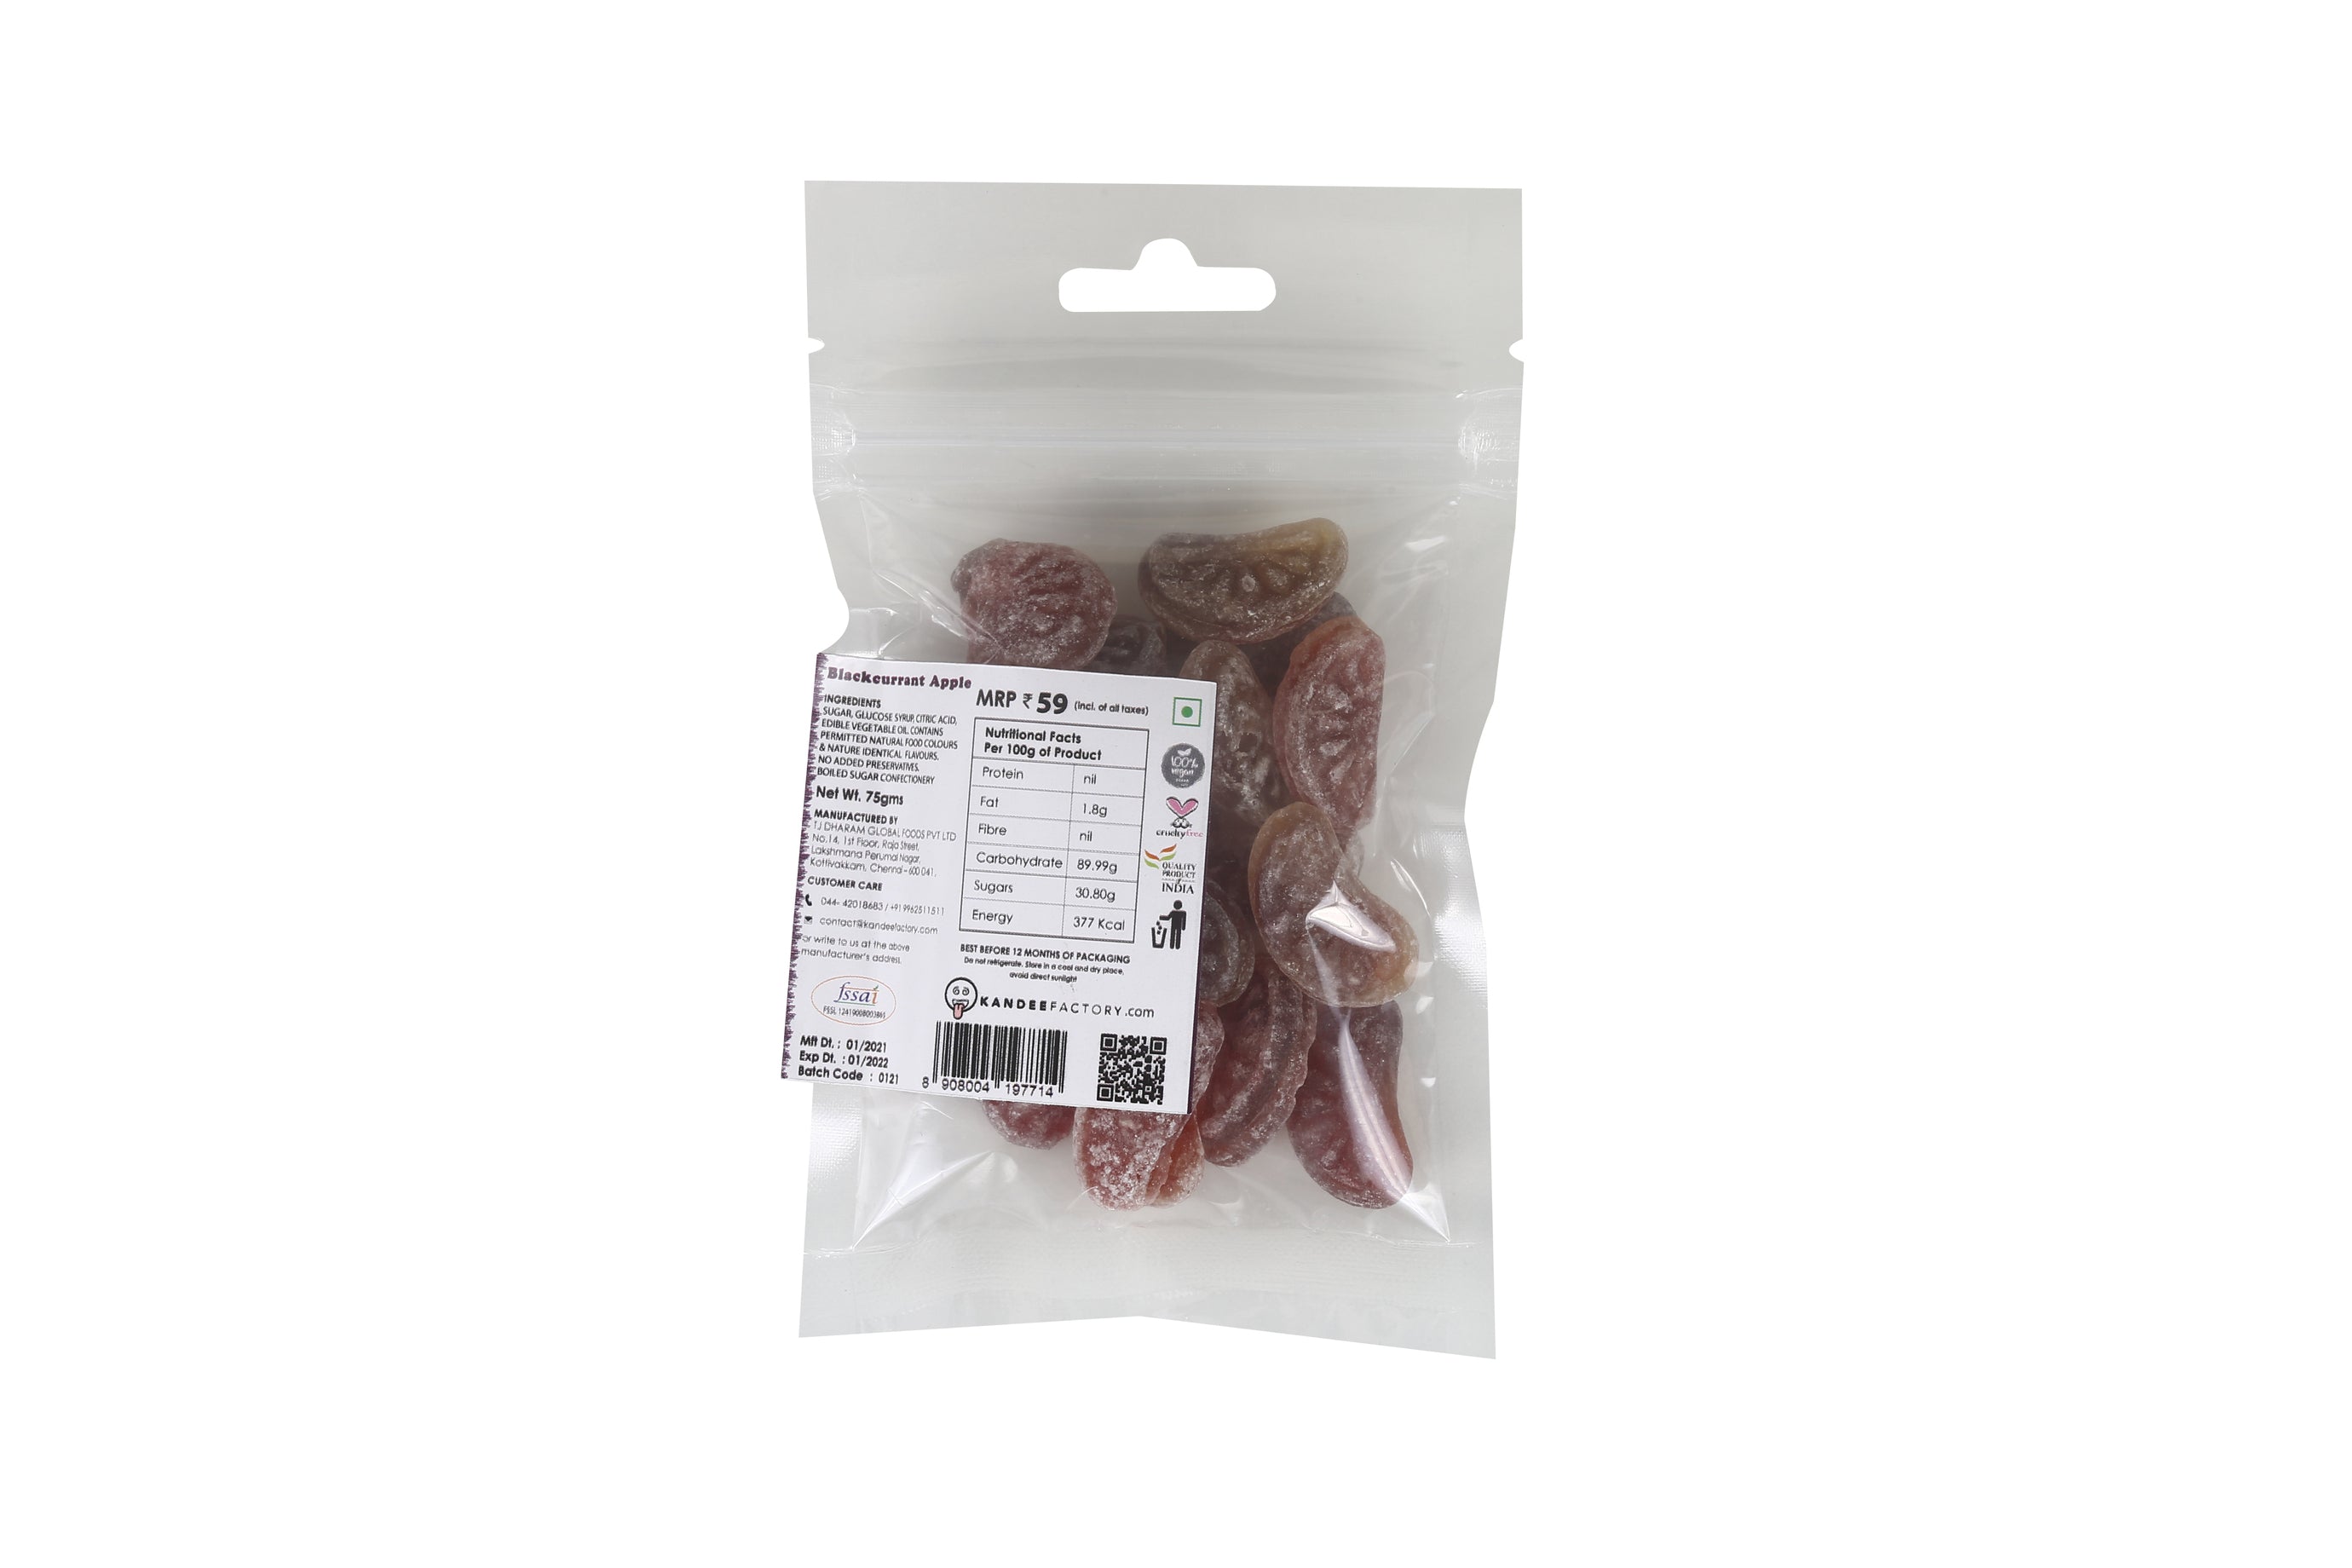 Blackcurrant Apple | Pack of 6 | Hard Candy | Orileys